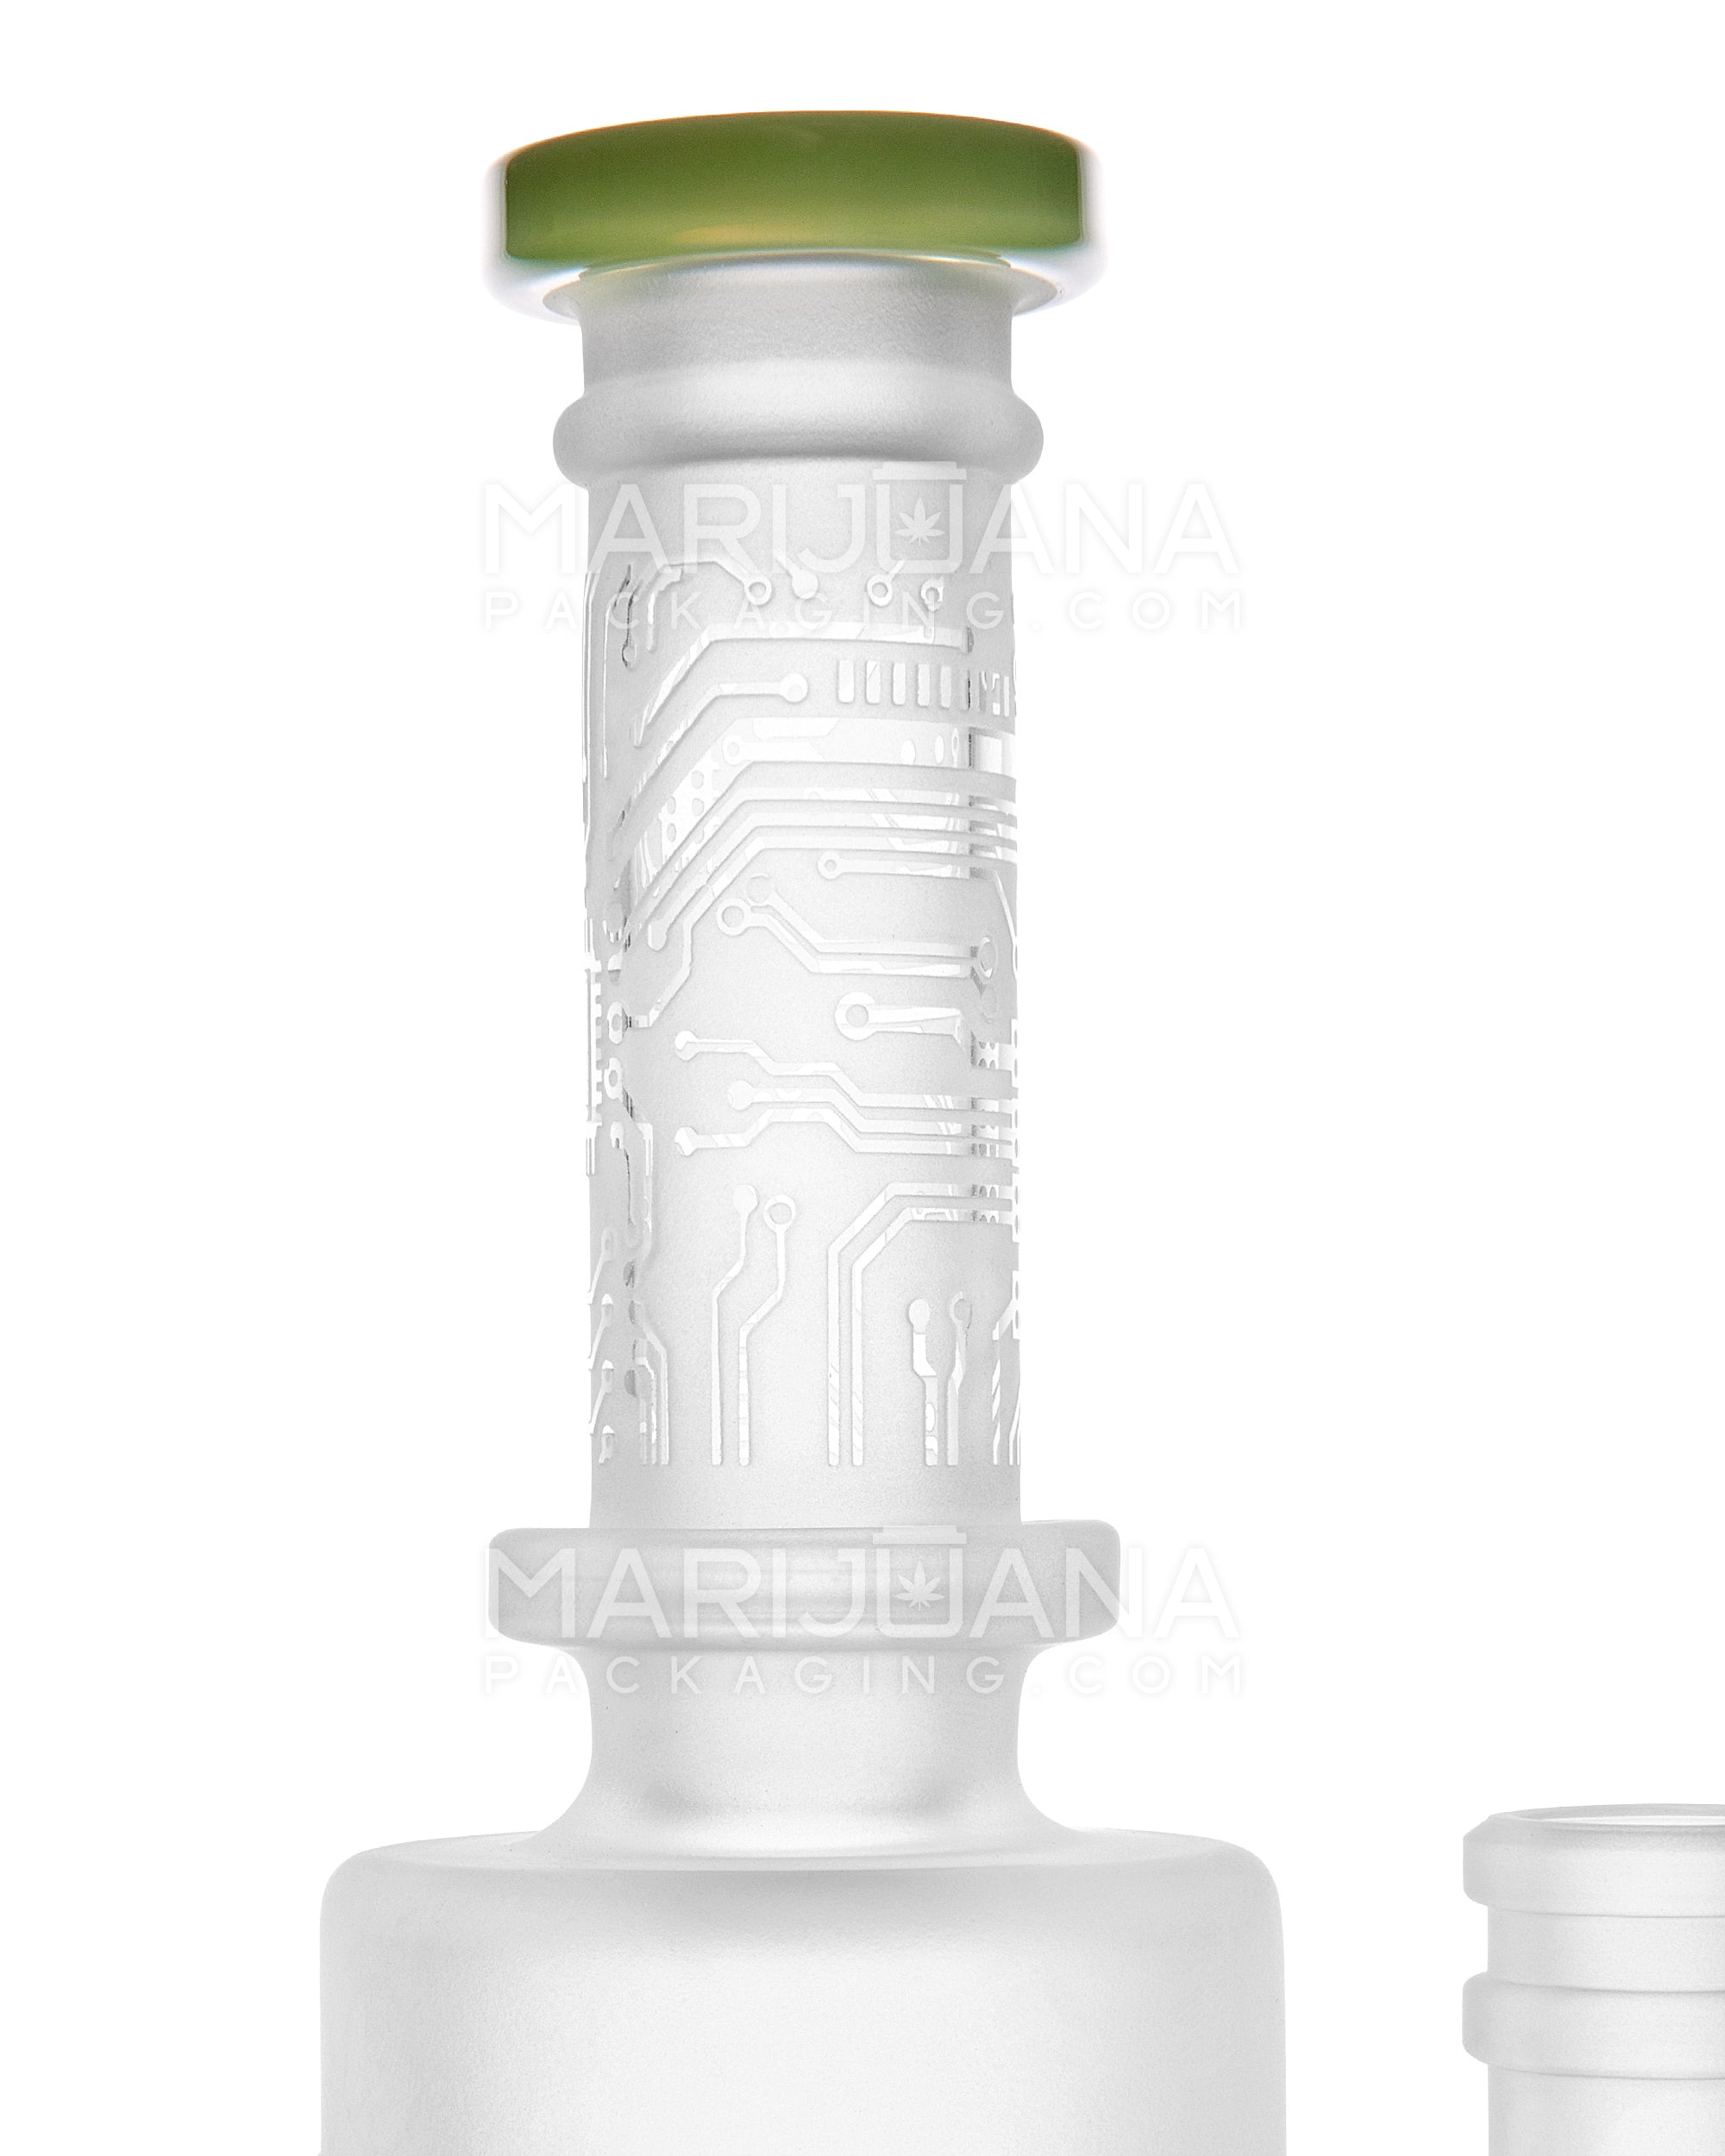 Straight Neck Sandblasted Circuitboard Showerhead Perc Glass Water Pipe w/ Thick Base | 9.5in Tall - 14mm Bowl - Slime - 4